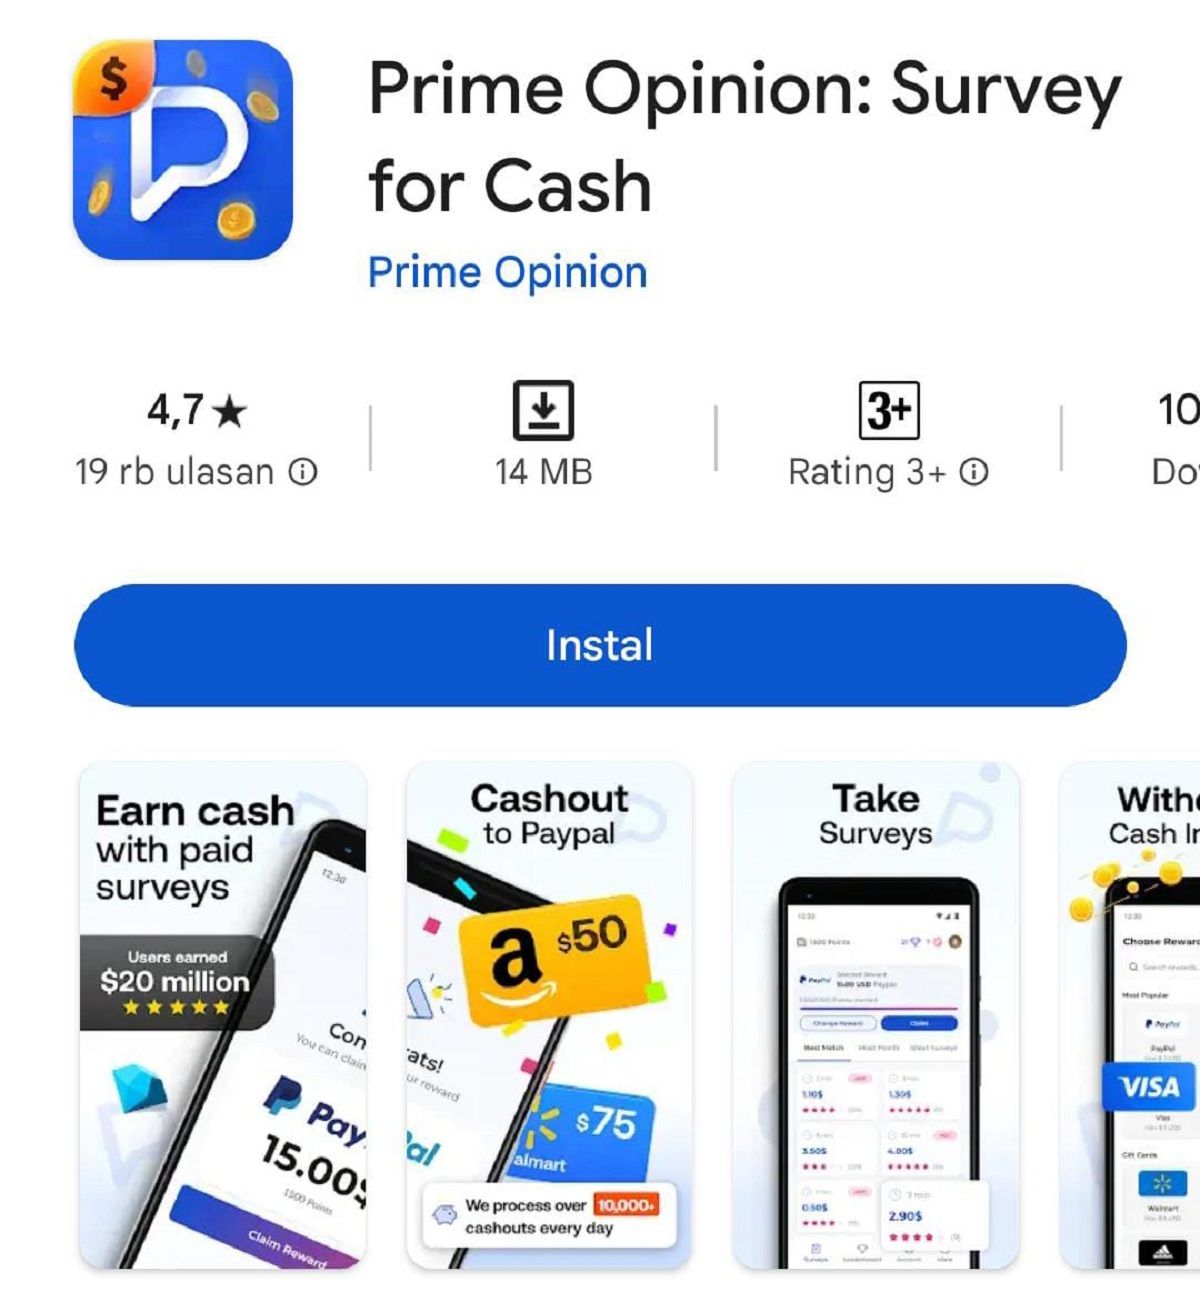 Prime Opinion: Survey for Cash / Google Play Store